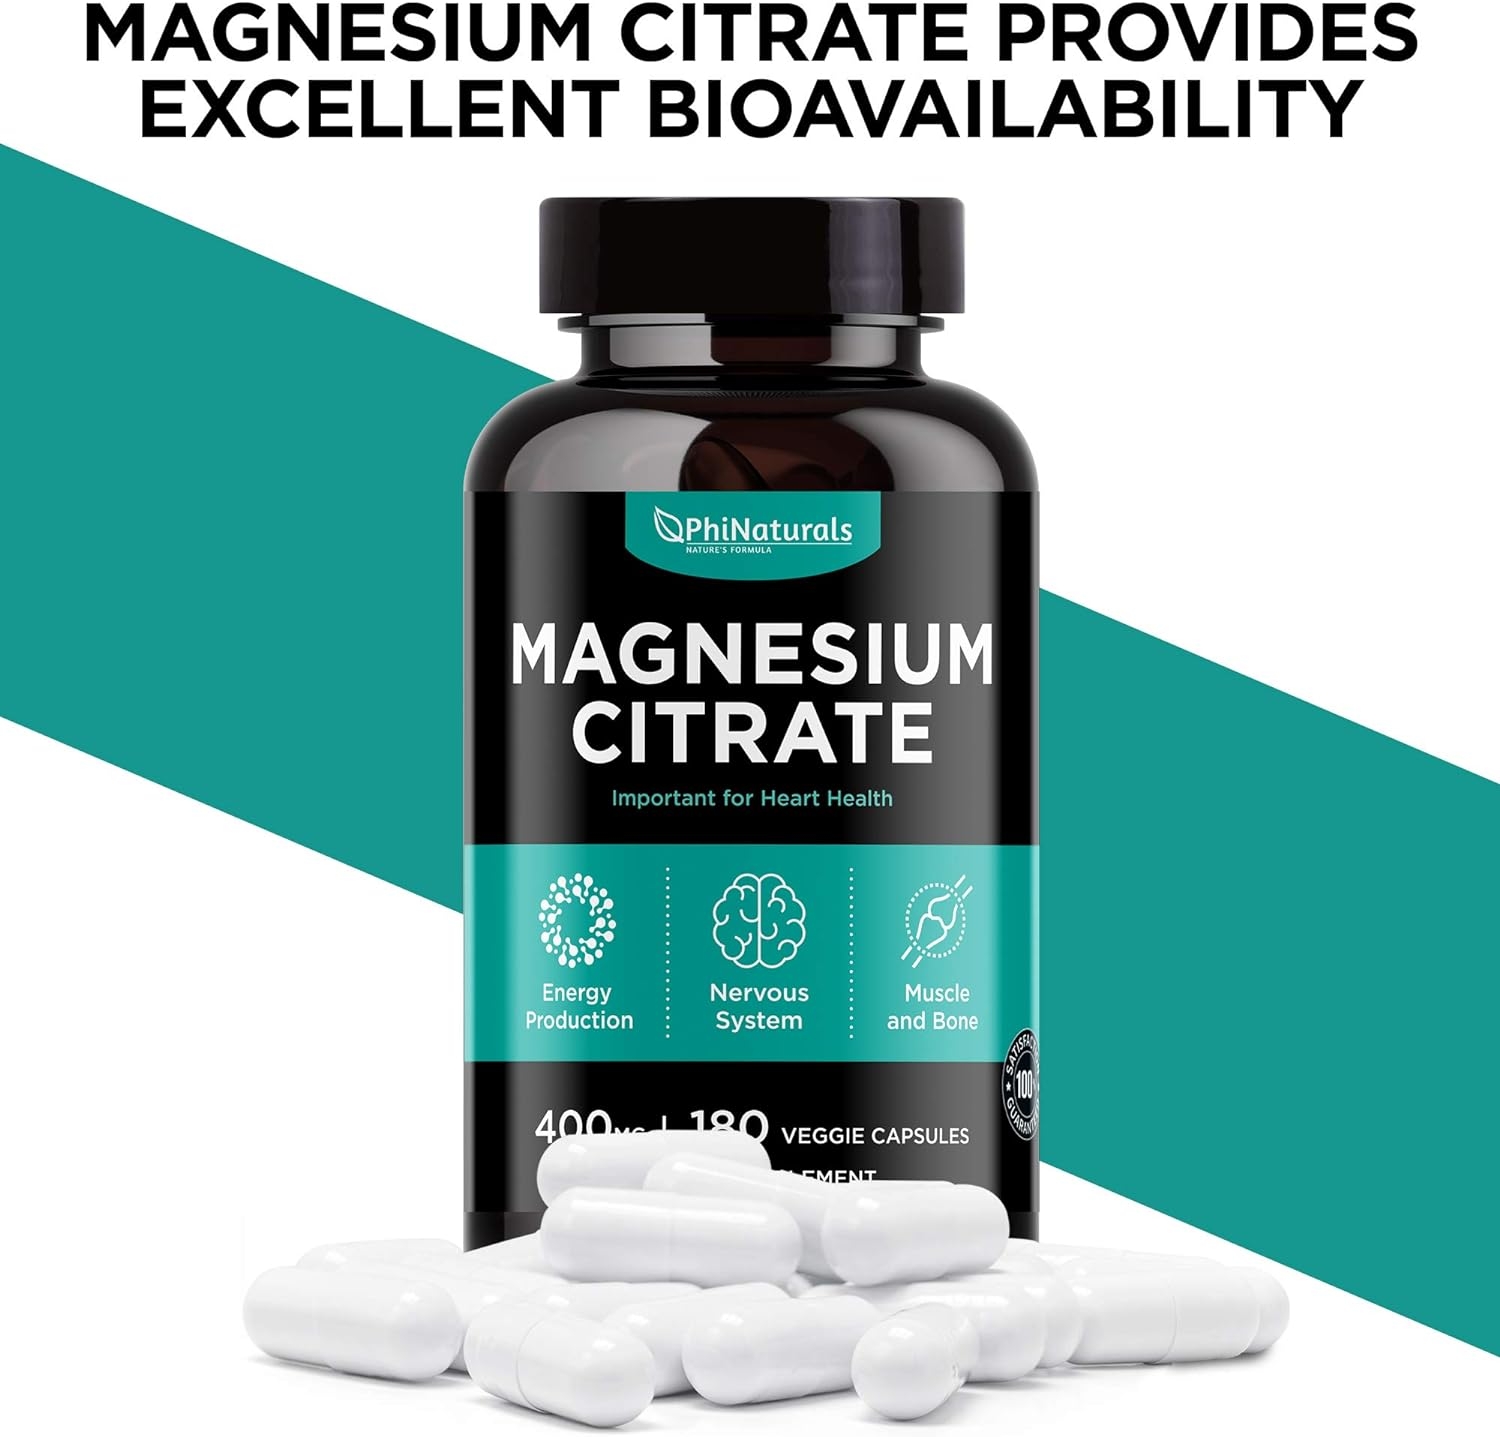 Magnesium Citrate Powder Capsules 400mg – [180 Count] Pure Non-GMO Supplements – Natural Sleep Calm Relax - Made in The USA